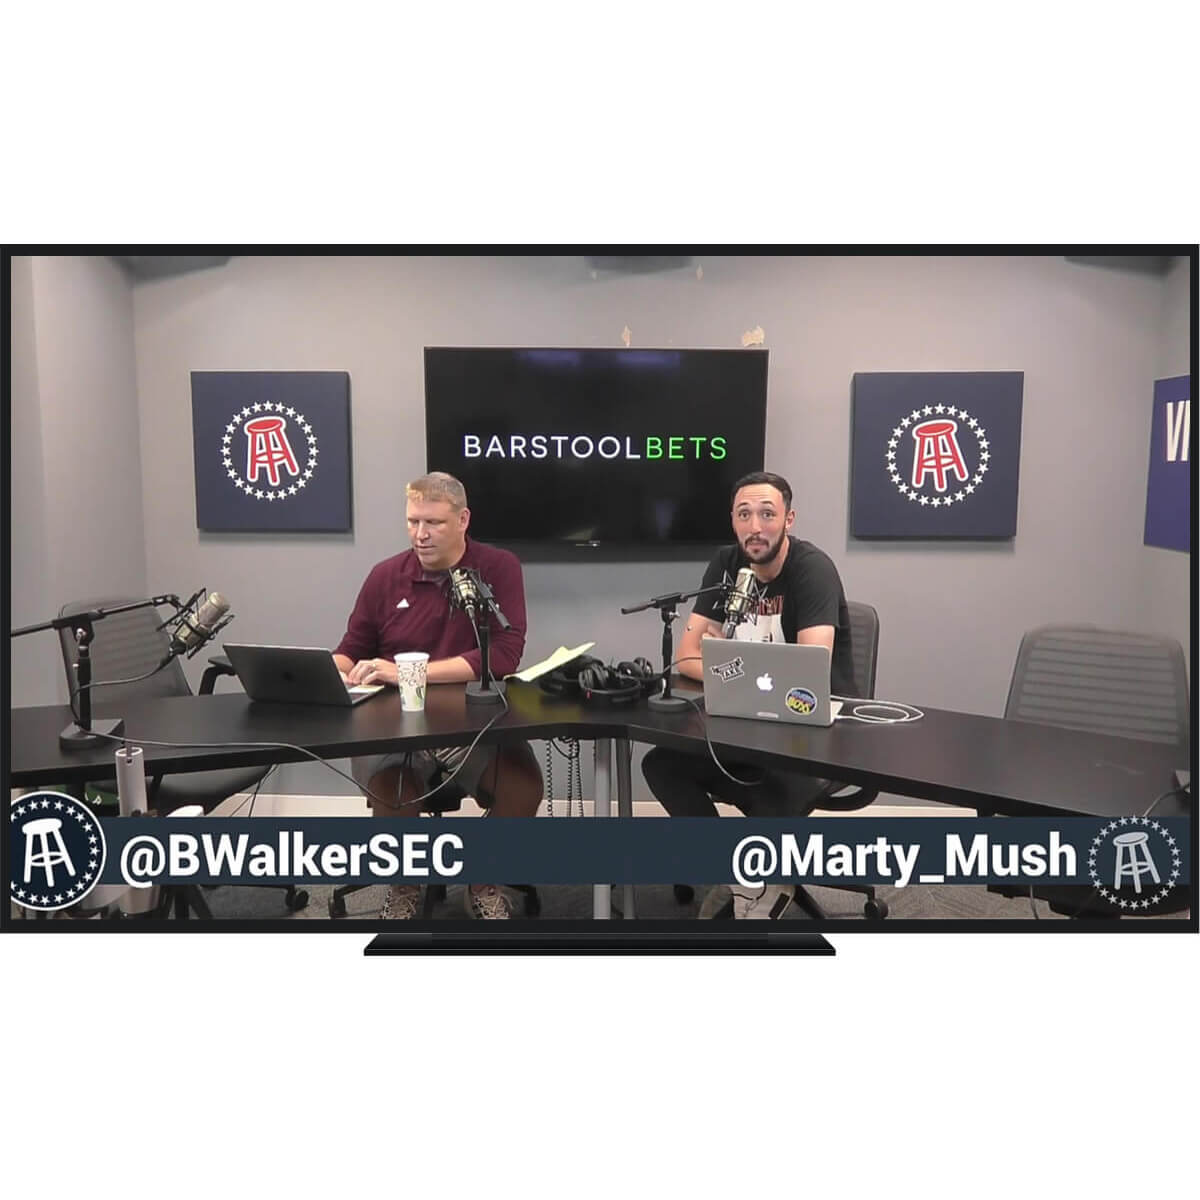 Barstool Bets on Android TV